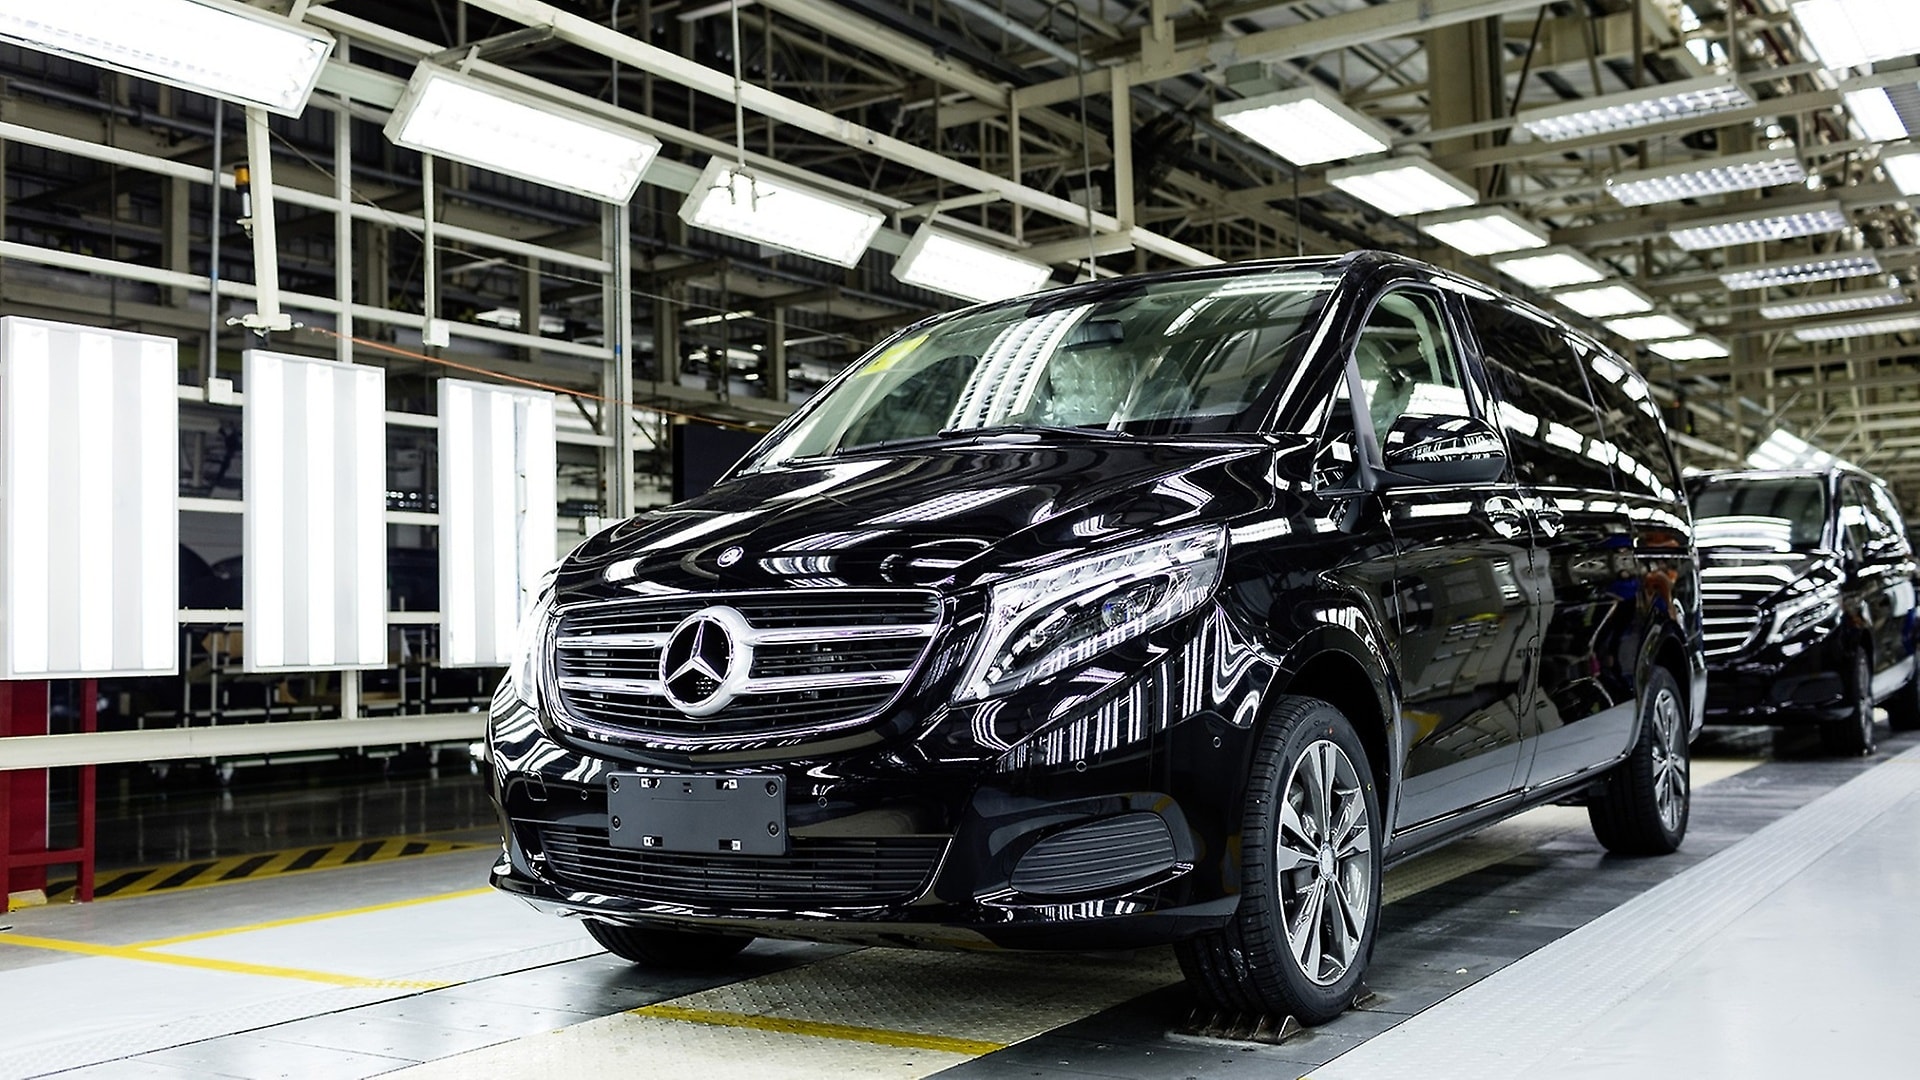 Production of the Multi-Purpose-Vehicle V-Class at the Fuzhou plant of Fujian Benz Automotive Co., Ltd. (FBAC). Additionally, the midsize van Vito is locally produced “made in China for China”.